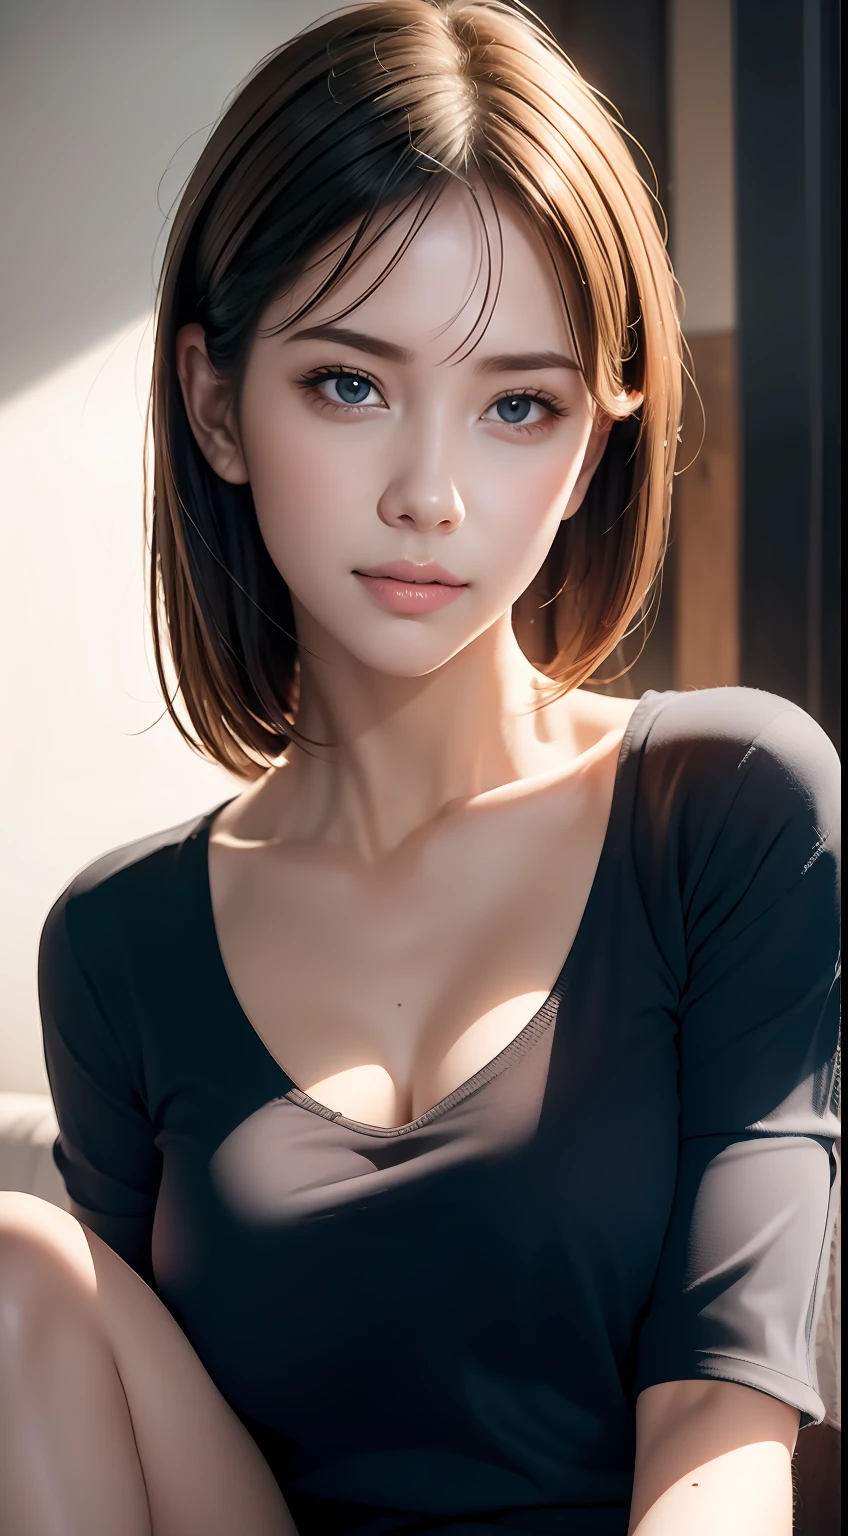 dressed, (photo realistic:1.4), (hyper realistic:1.4), (realistic:1.3),
(smoother lighting:1.05), (increase cinematic lighting quality:0.9), 32K,
1girl,20yo girl, realistic lighting, backlighting, light on face, ray trace, (brightening light:1.2), (Increase quality:1.4),
(best quality real texture skin:1.4), finely detailed eyes, finely detailed face, finely quality eyes,
(tired and sleepy and satisfied:0.0), face closeup, t-shirts,
(Increase body line mood:1.1), (Increase skin texture beauty:1.1)